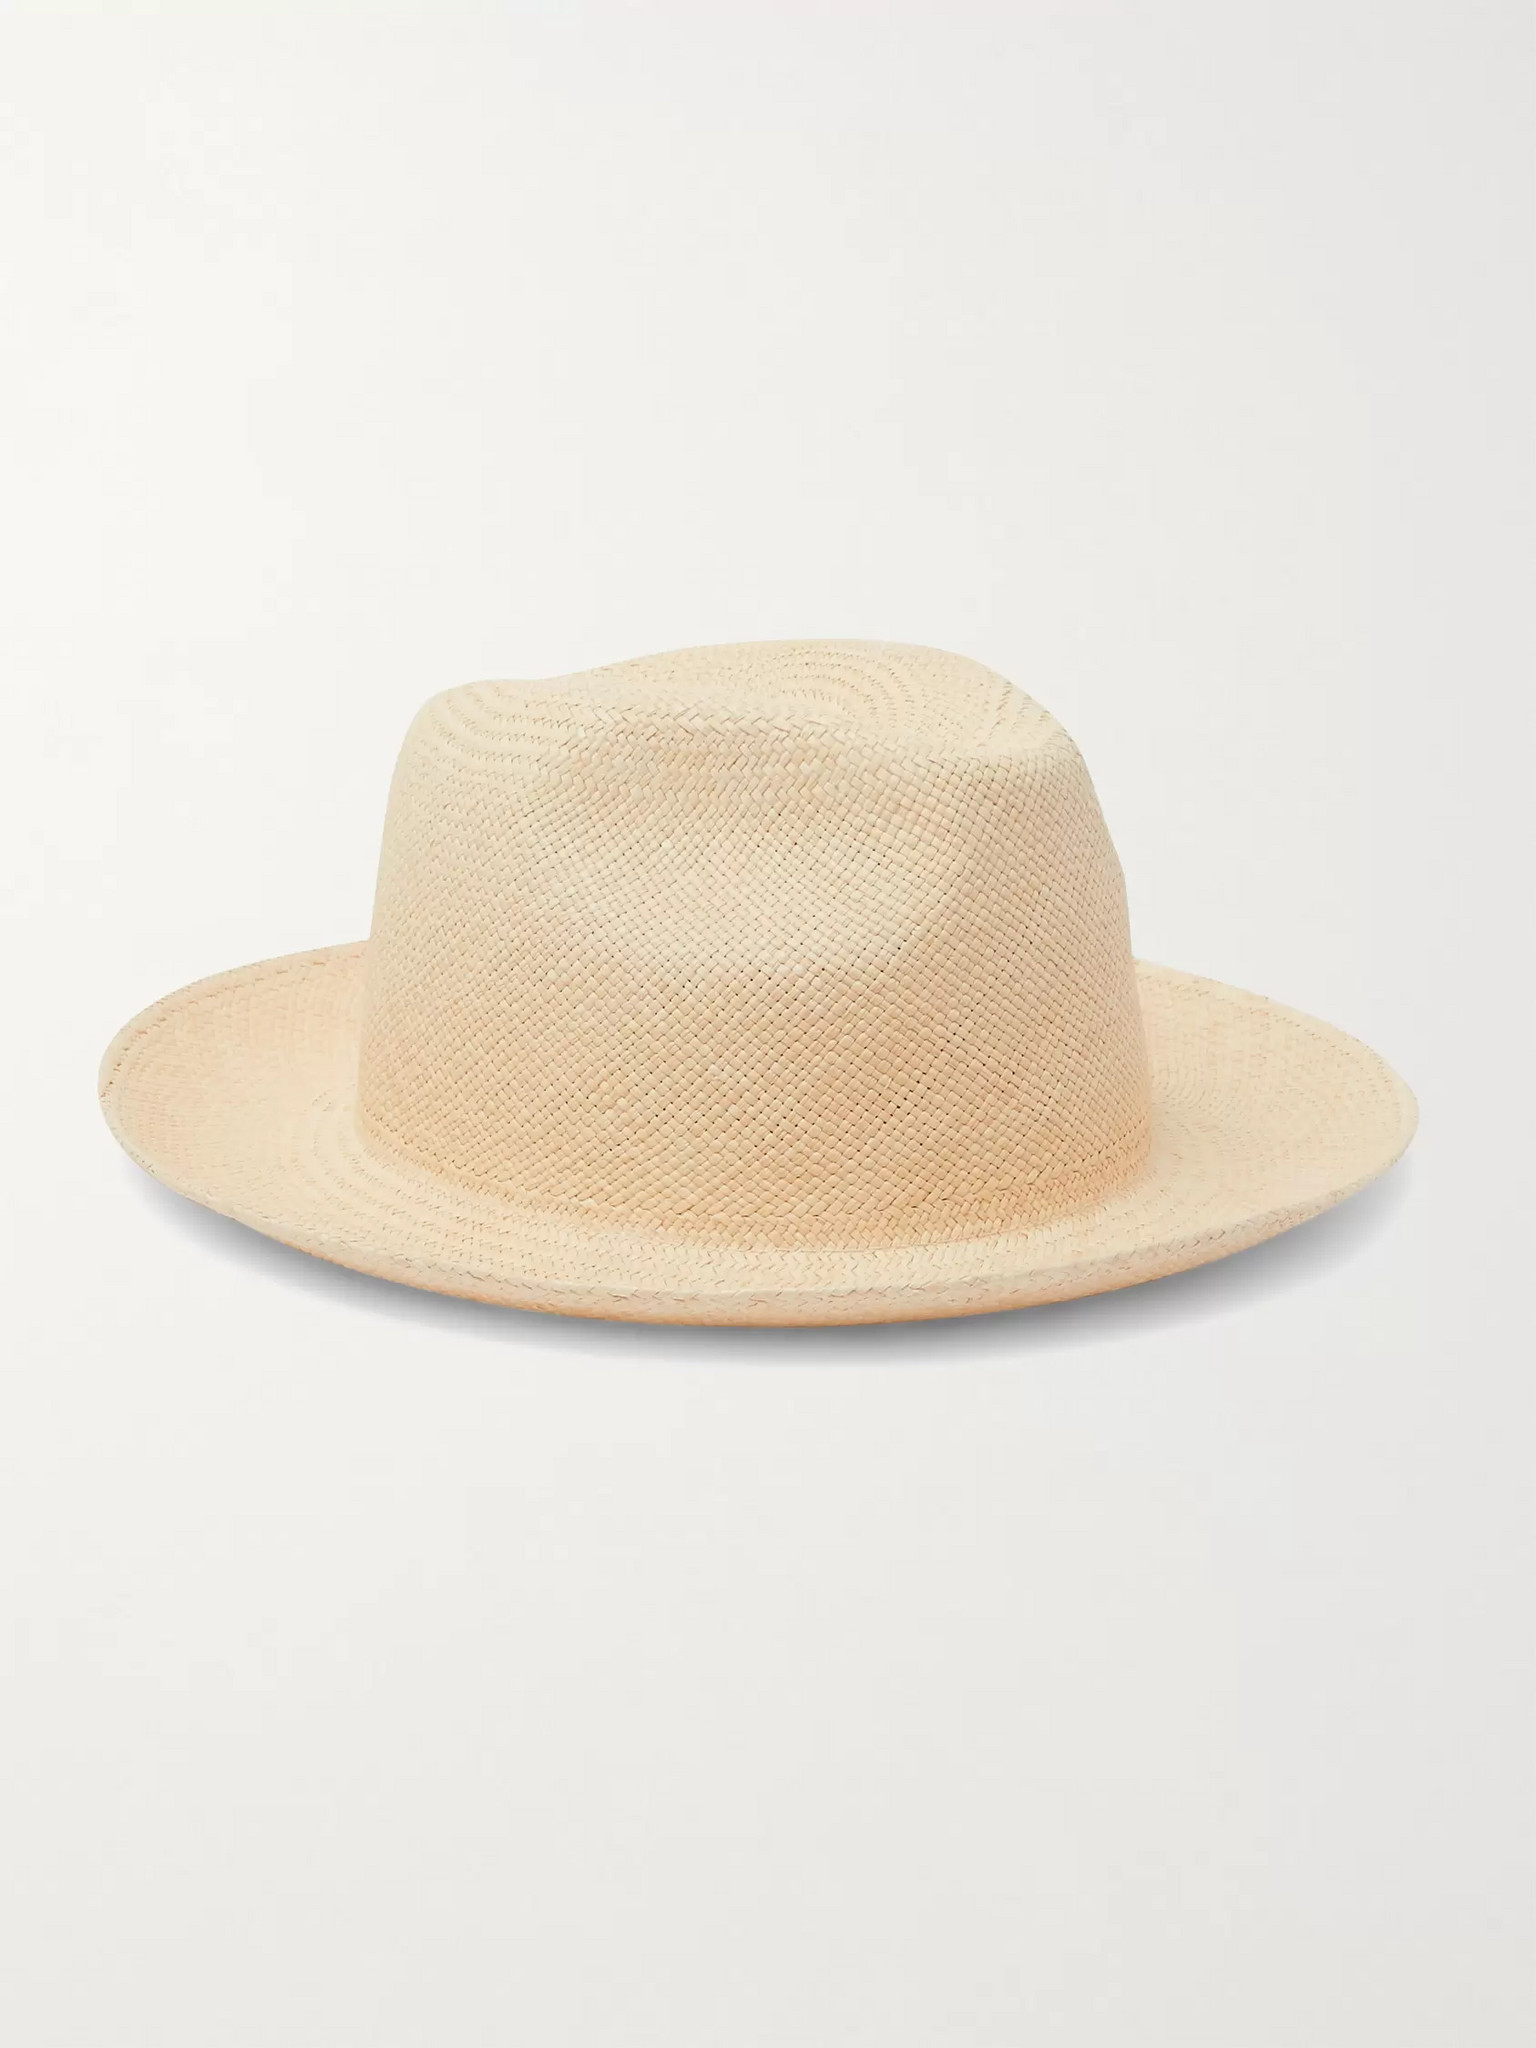 VILEBREQUIN-Charming-Straw-Hat - Timeless Fashion for men